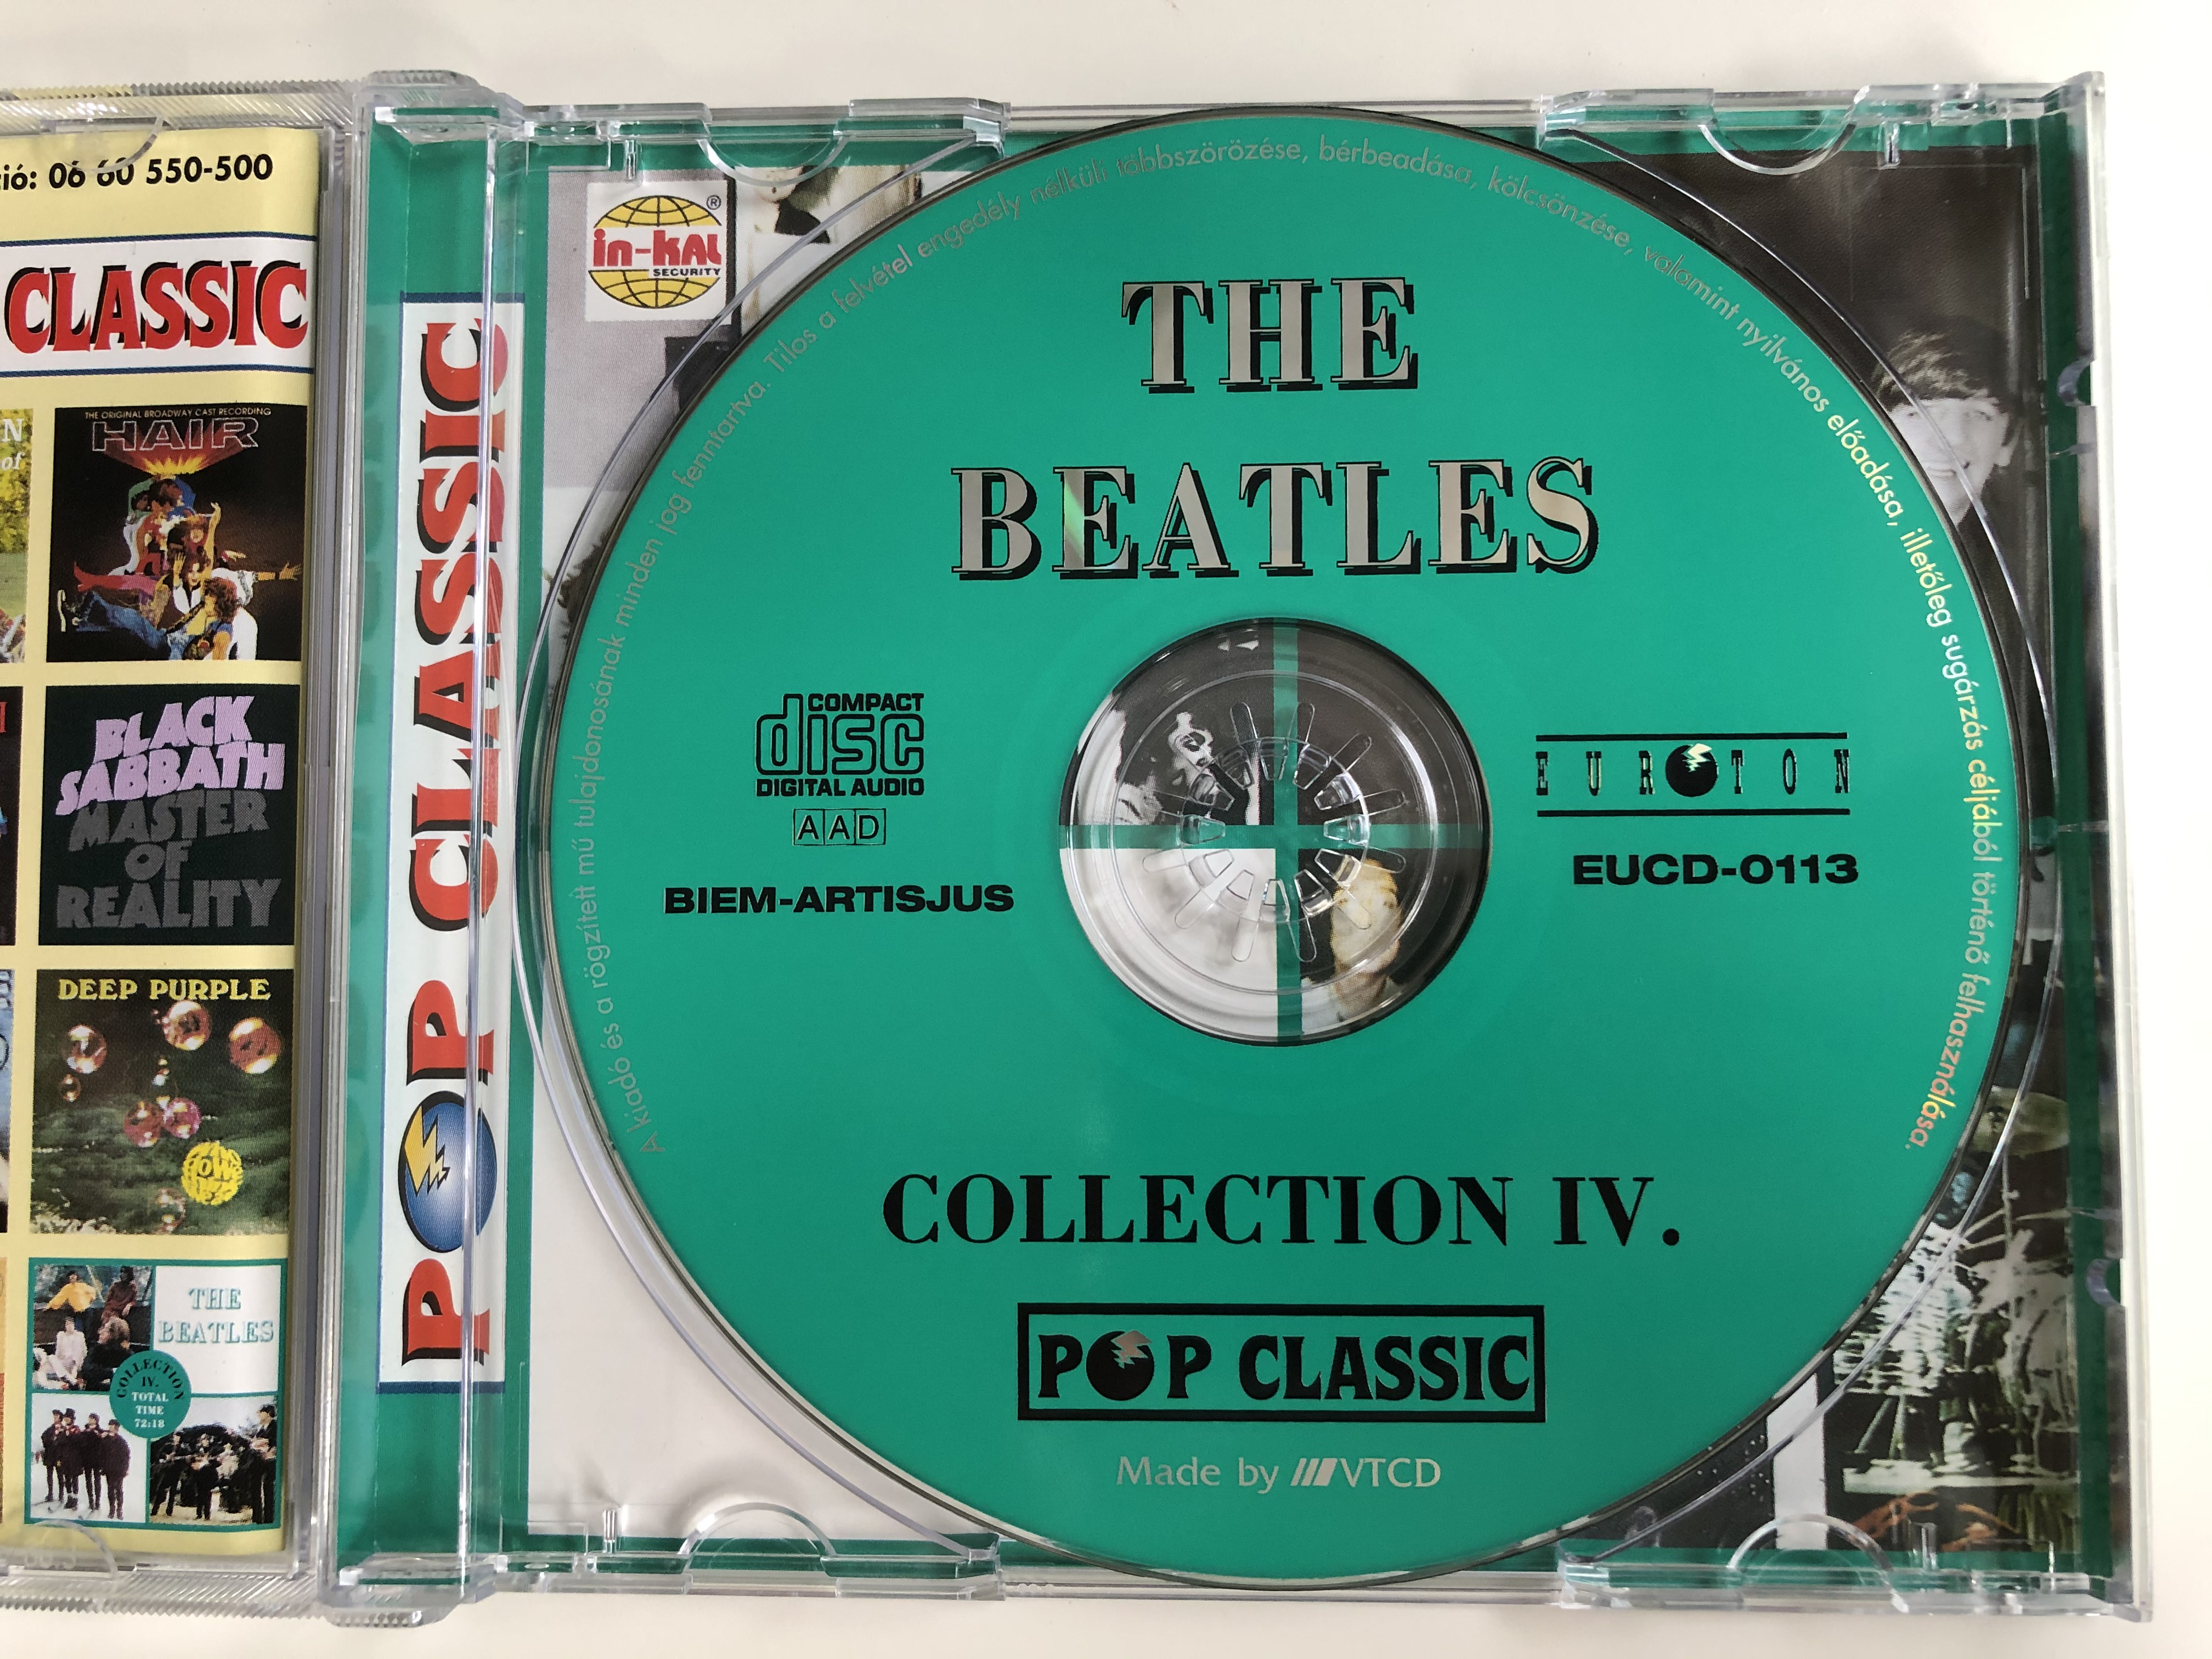 the-beatles-collection-iv.-total-time-7218-pop-classic-euroton-audio-cd-eucd-0113-2-.jpg